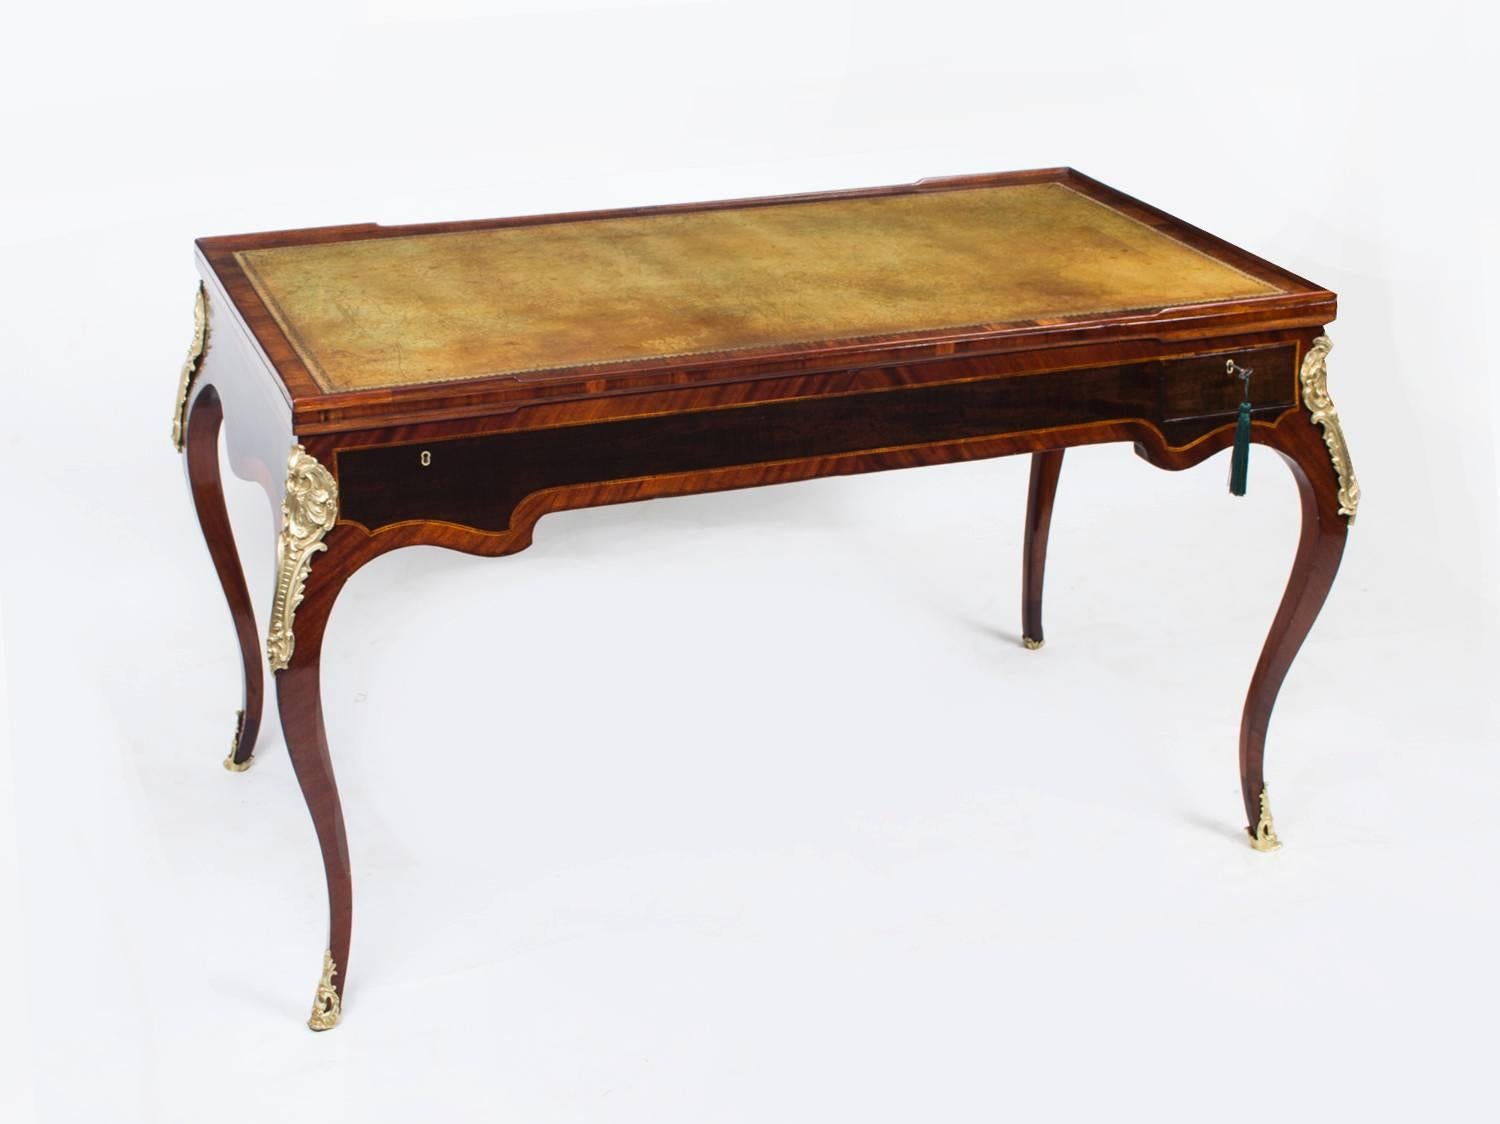 This is a lovely antique French burr walnut and ebonised tric-trac table, circa 1860 in date. 

The card table stands on elegant slender cabriole legs, is further decorated with gilded ormolu mounts and it has two useful drawers for storing chess